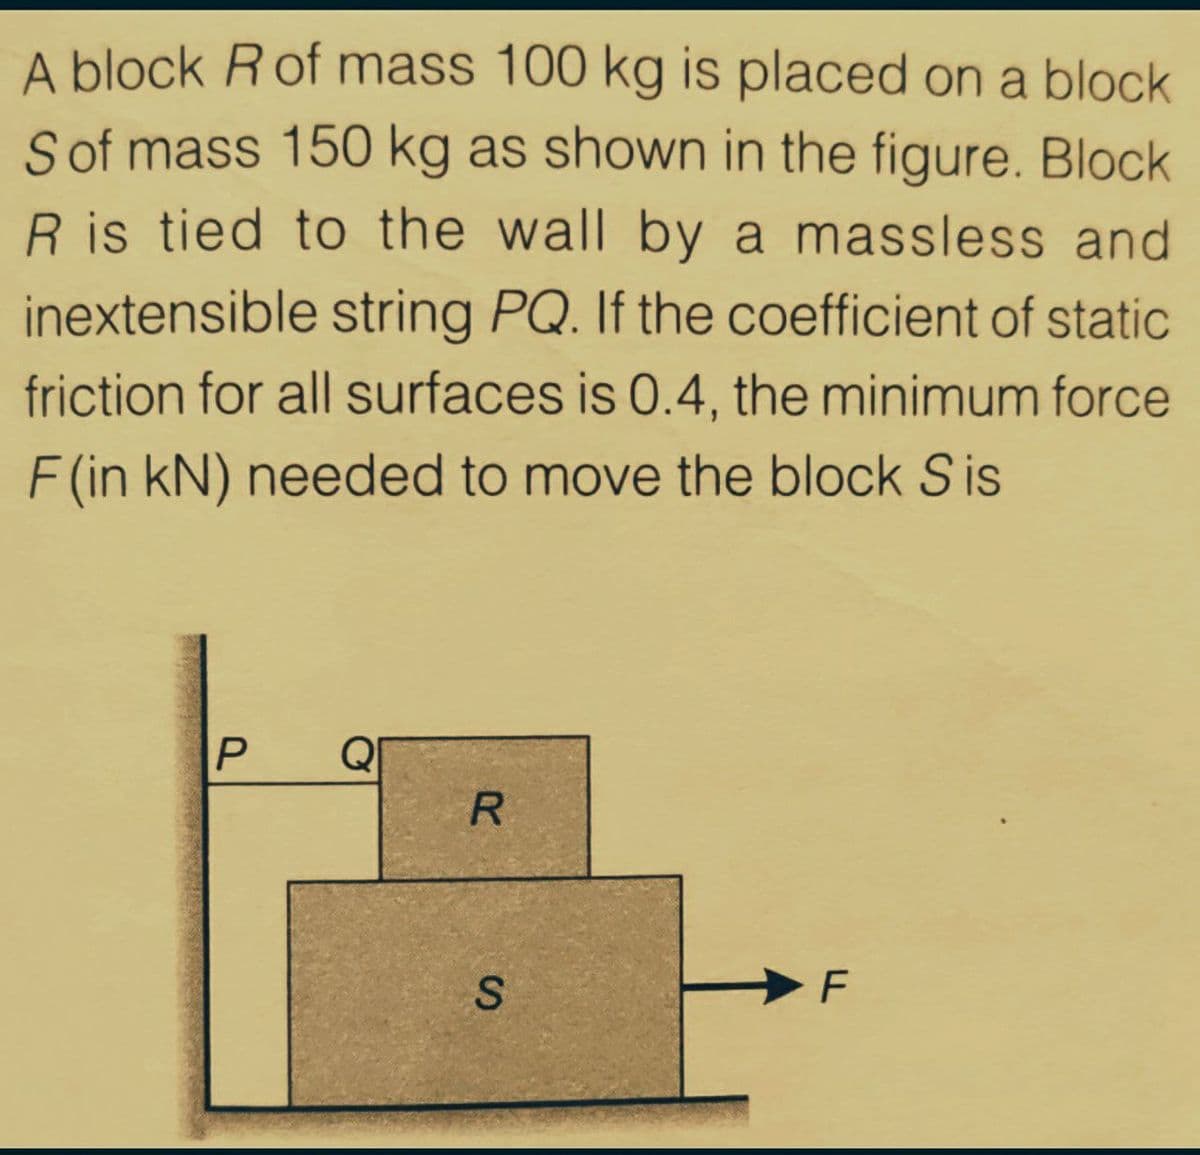 A block R of mass 100 kg is placed on a block
Sof mass 150 kg as shown in the figure. Block
R is tied to the wall by a massless and
inextensible string PQ. If the coefficient of static
friction for all surfaces is 0.4, the minimum force
F (in kN) needed to move the block S is
Q
R
P.
